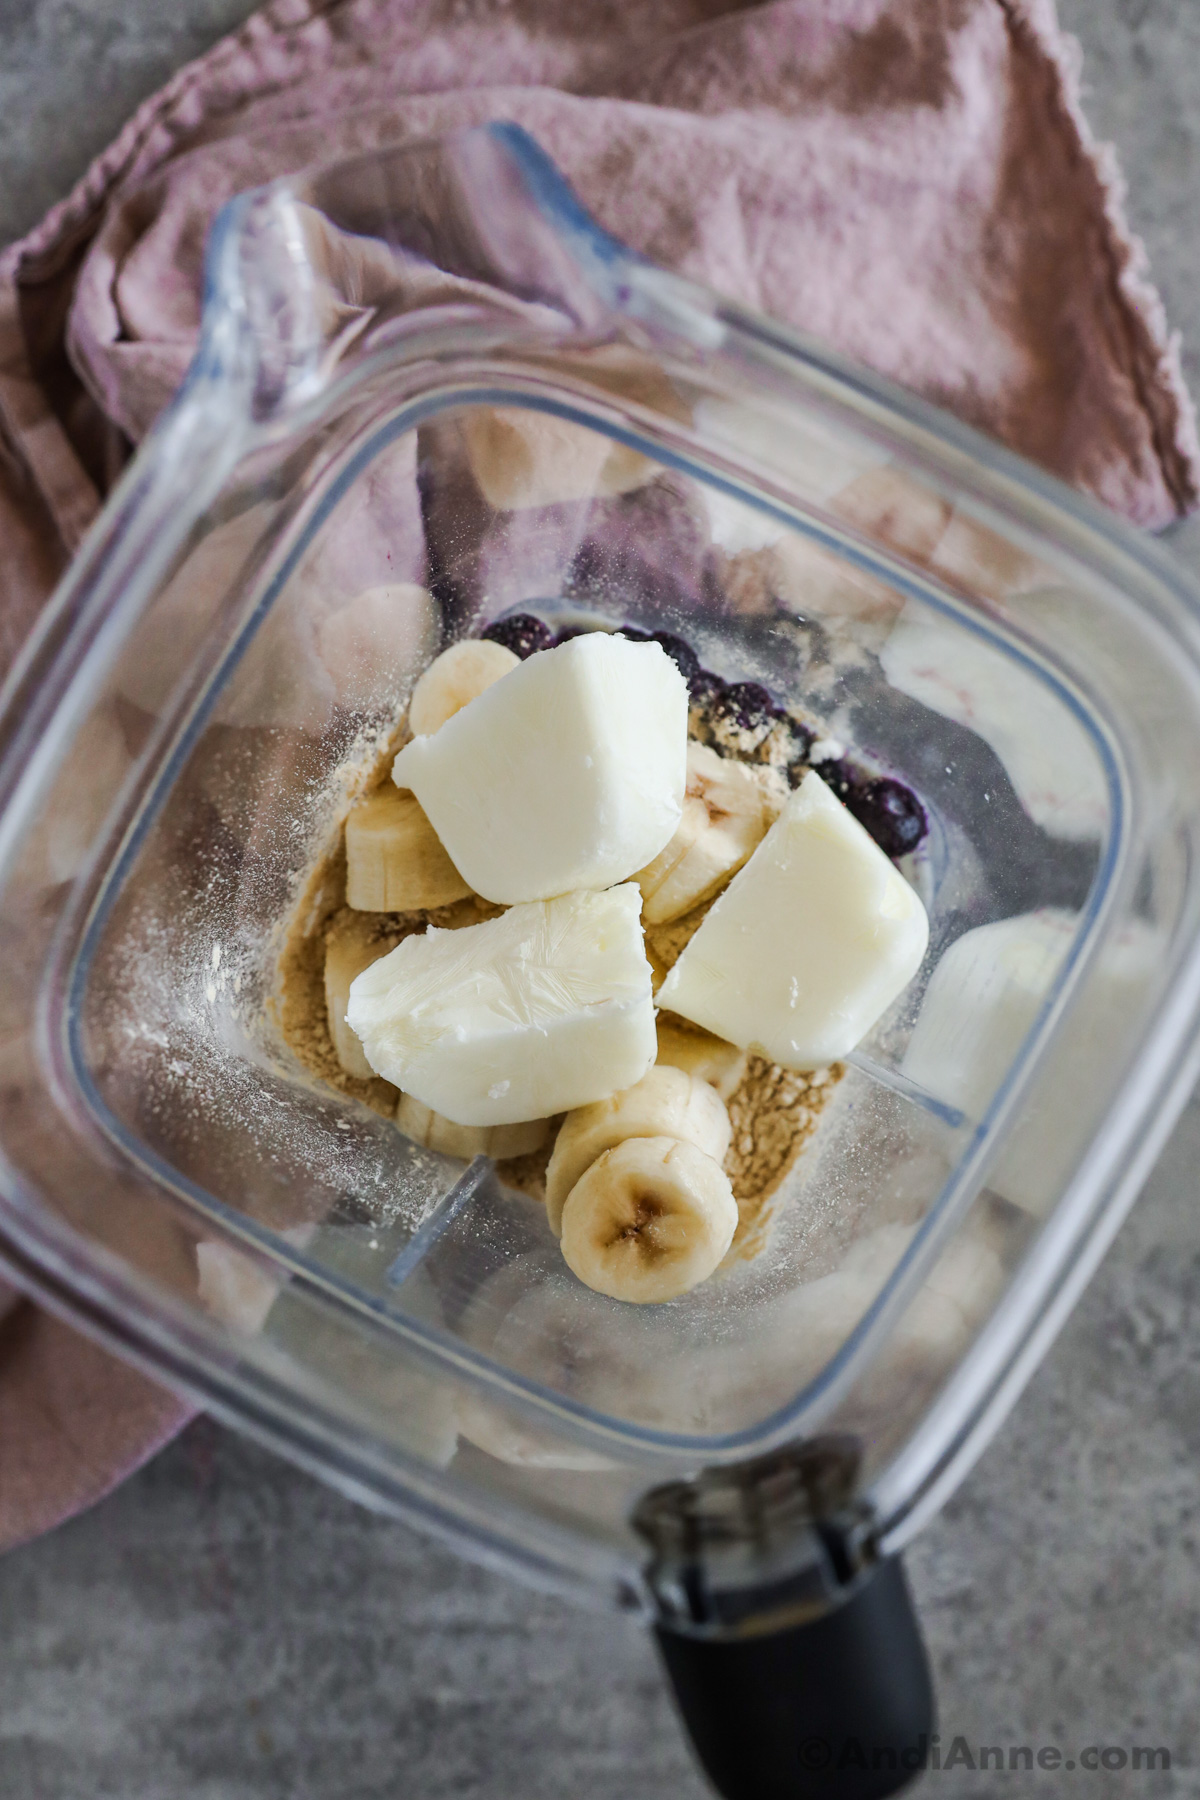 Looking into a blender cup with cubes of frozen yogurt, sliced banana, blueberries and protein powder.